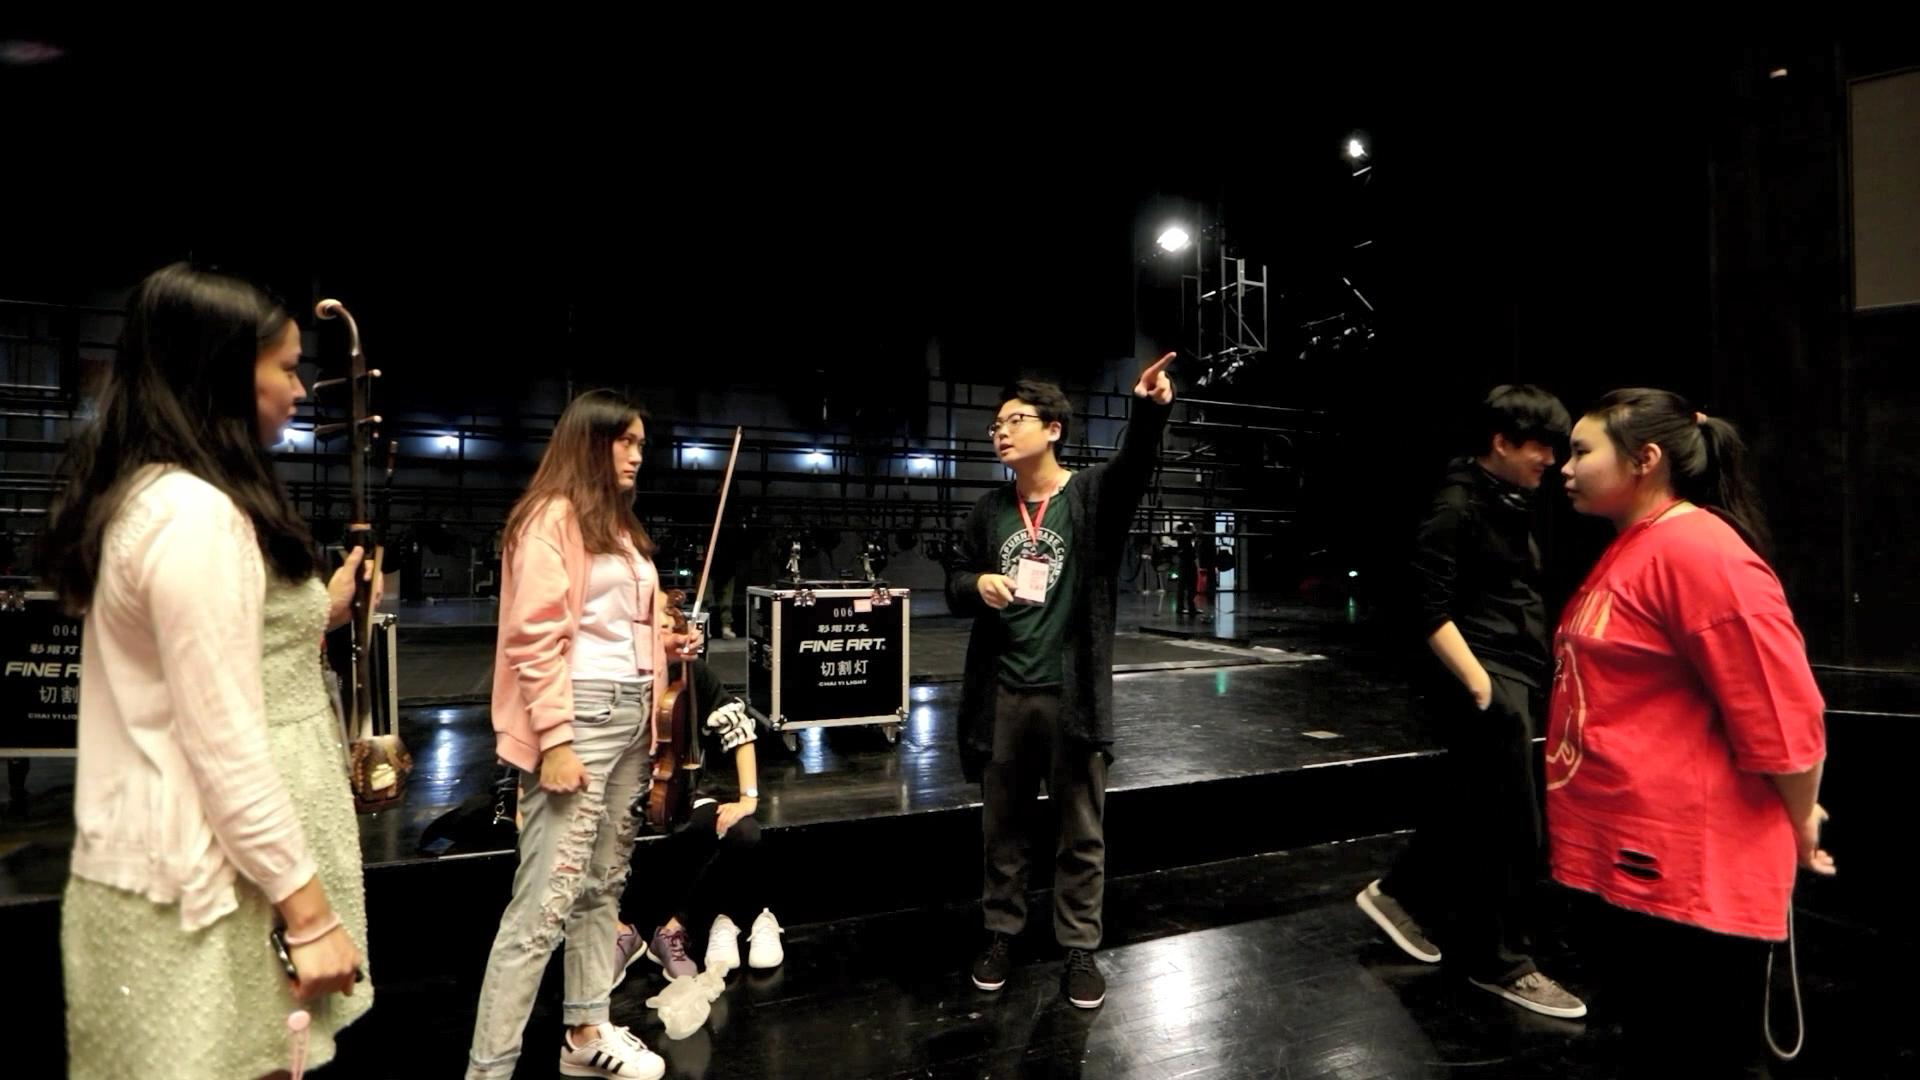 Ding Yiteng works with his team in a theater in Beijing. /Courtesy: Ding Yiteng